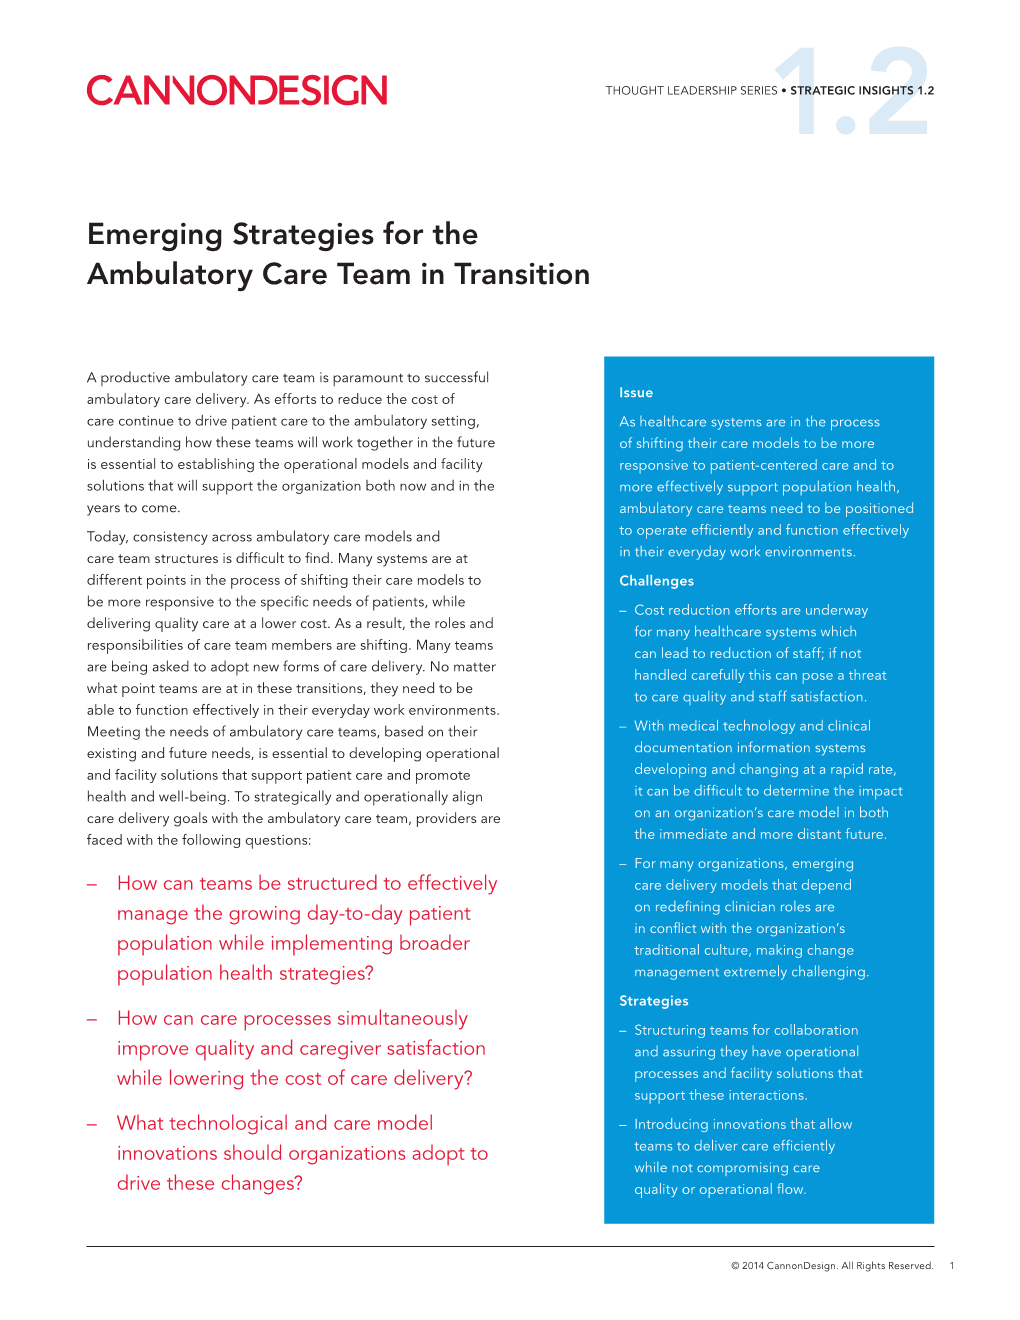 Emerging Strategies for the Ambulatory Care Team in Transition